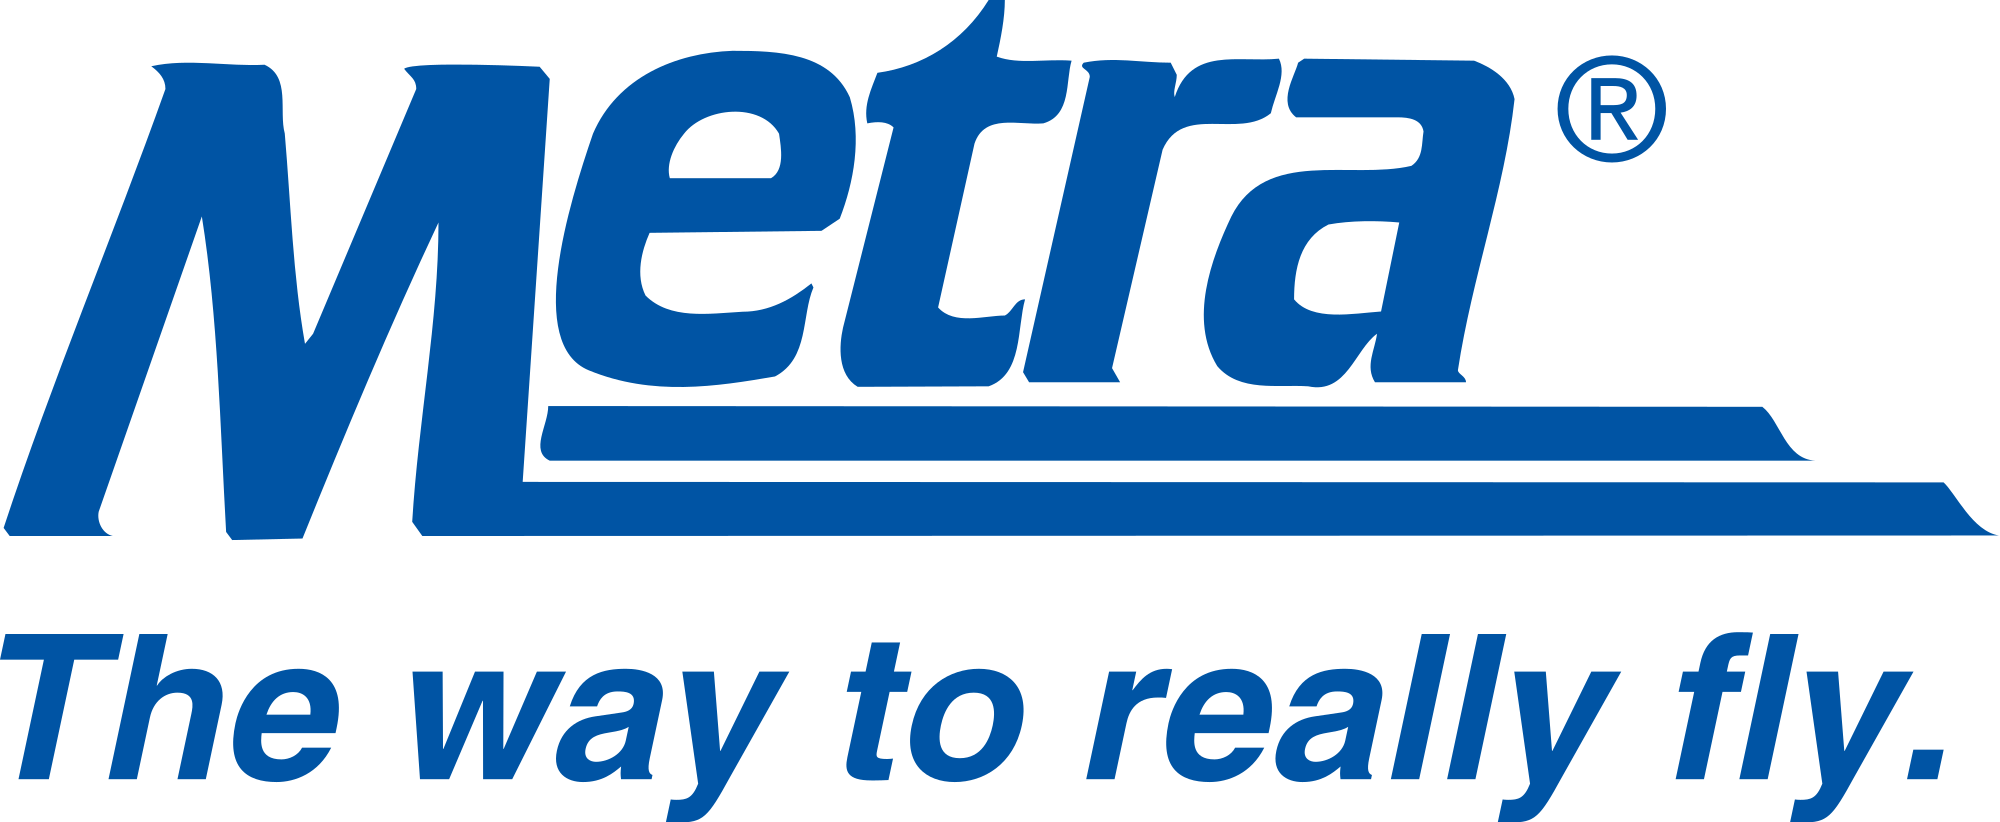 File metra logo svg. Png to vector